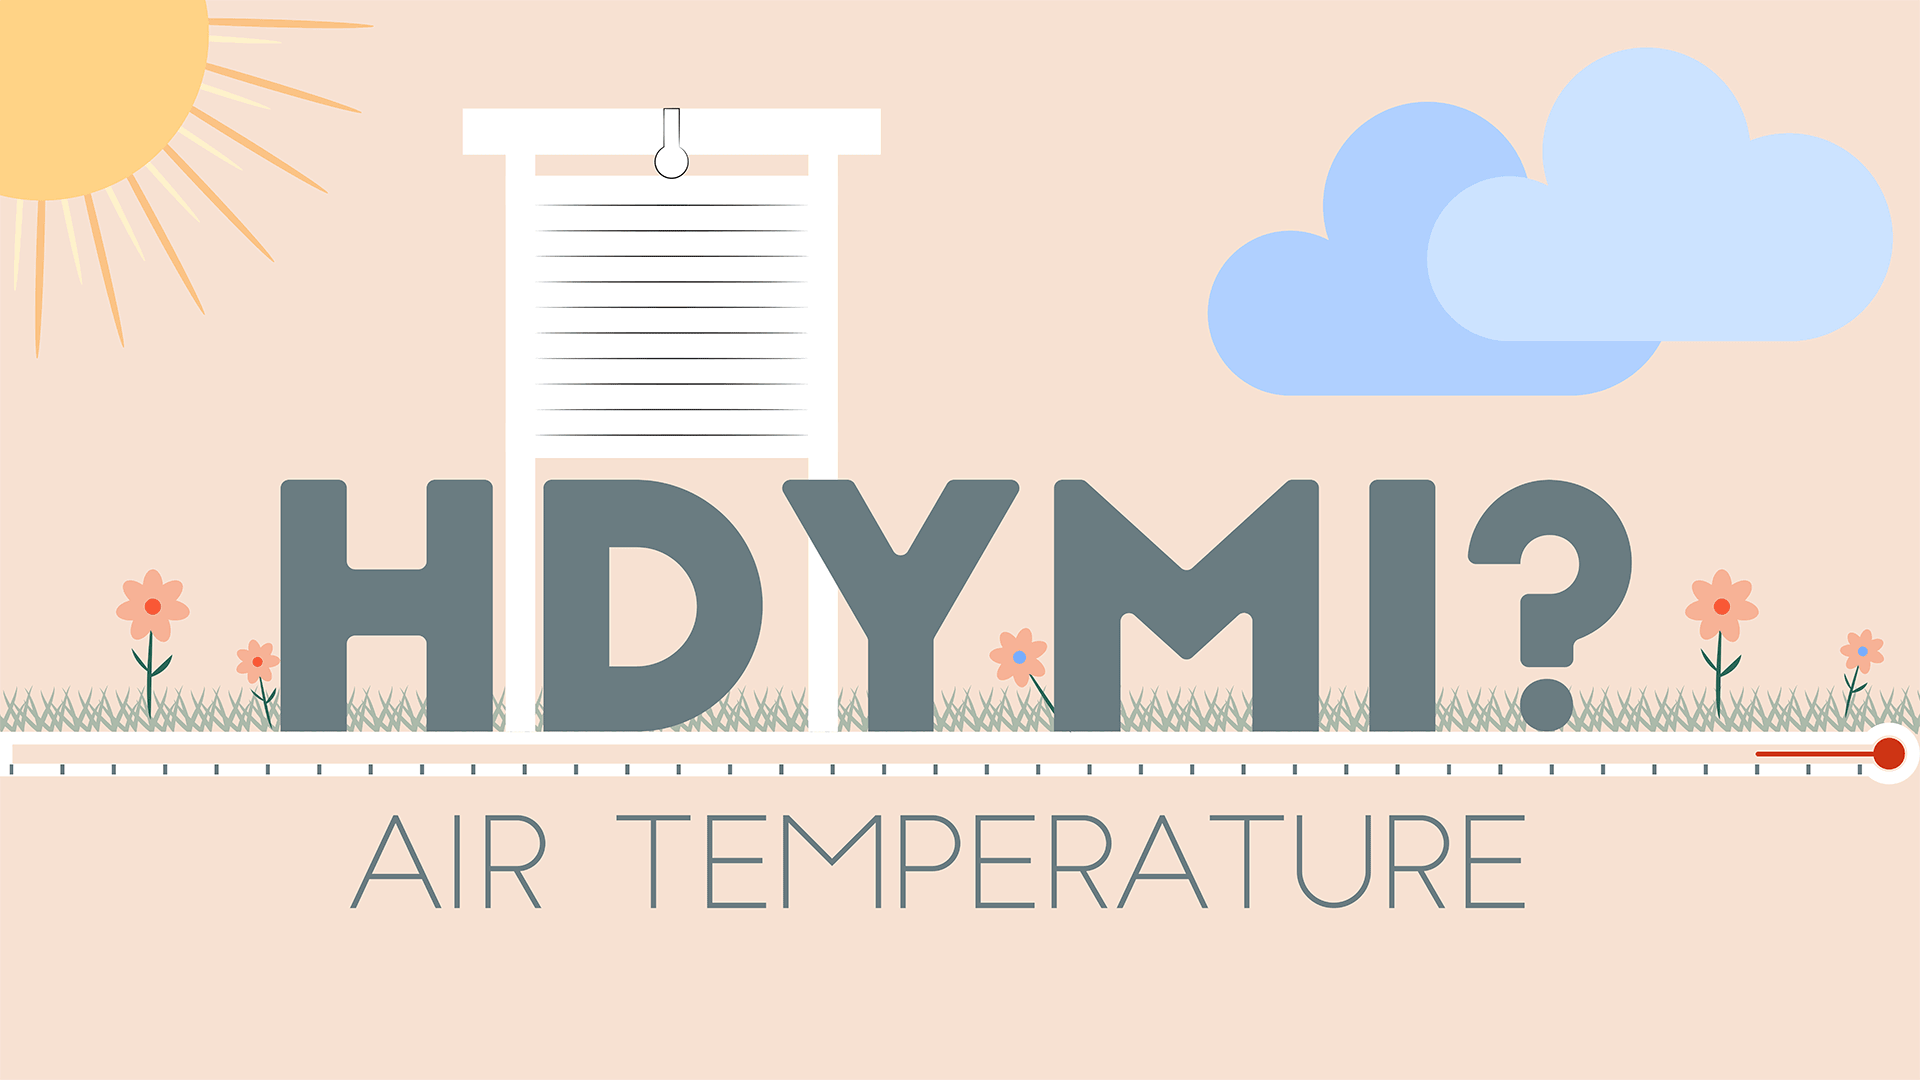 Animated illustration shows thermometers with wind blowing and the Sun shining: HDYMI? Air Temperature. 